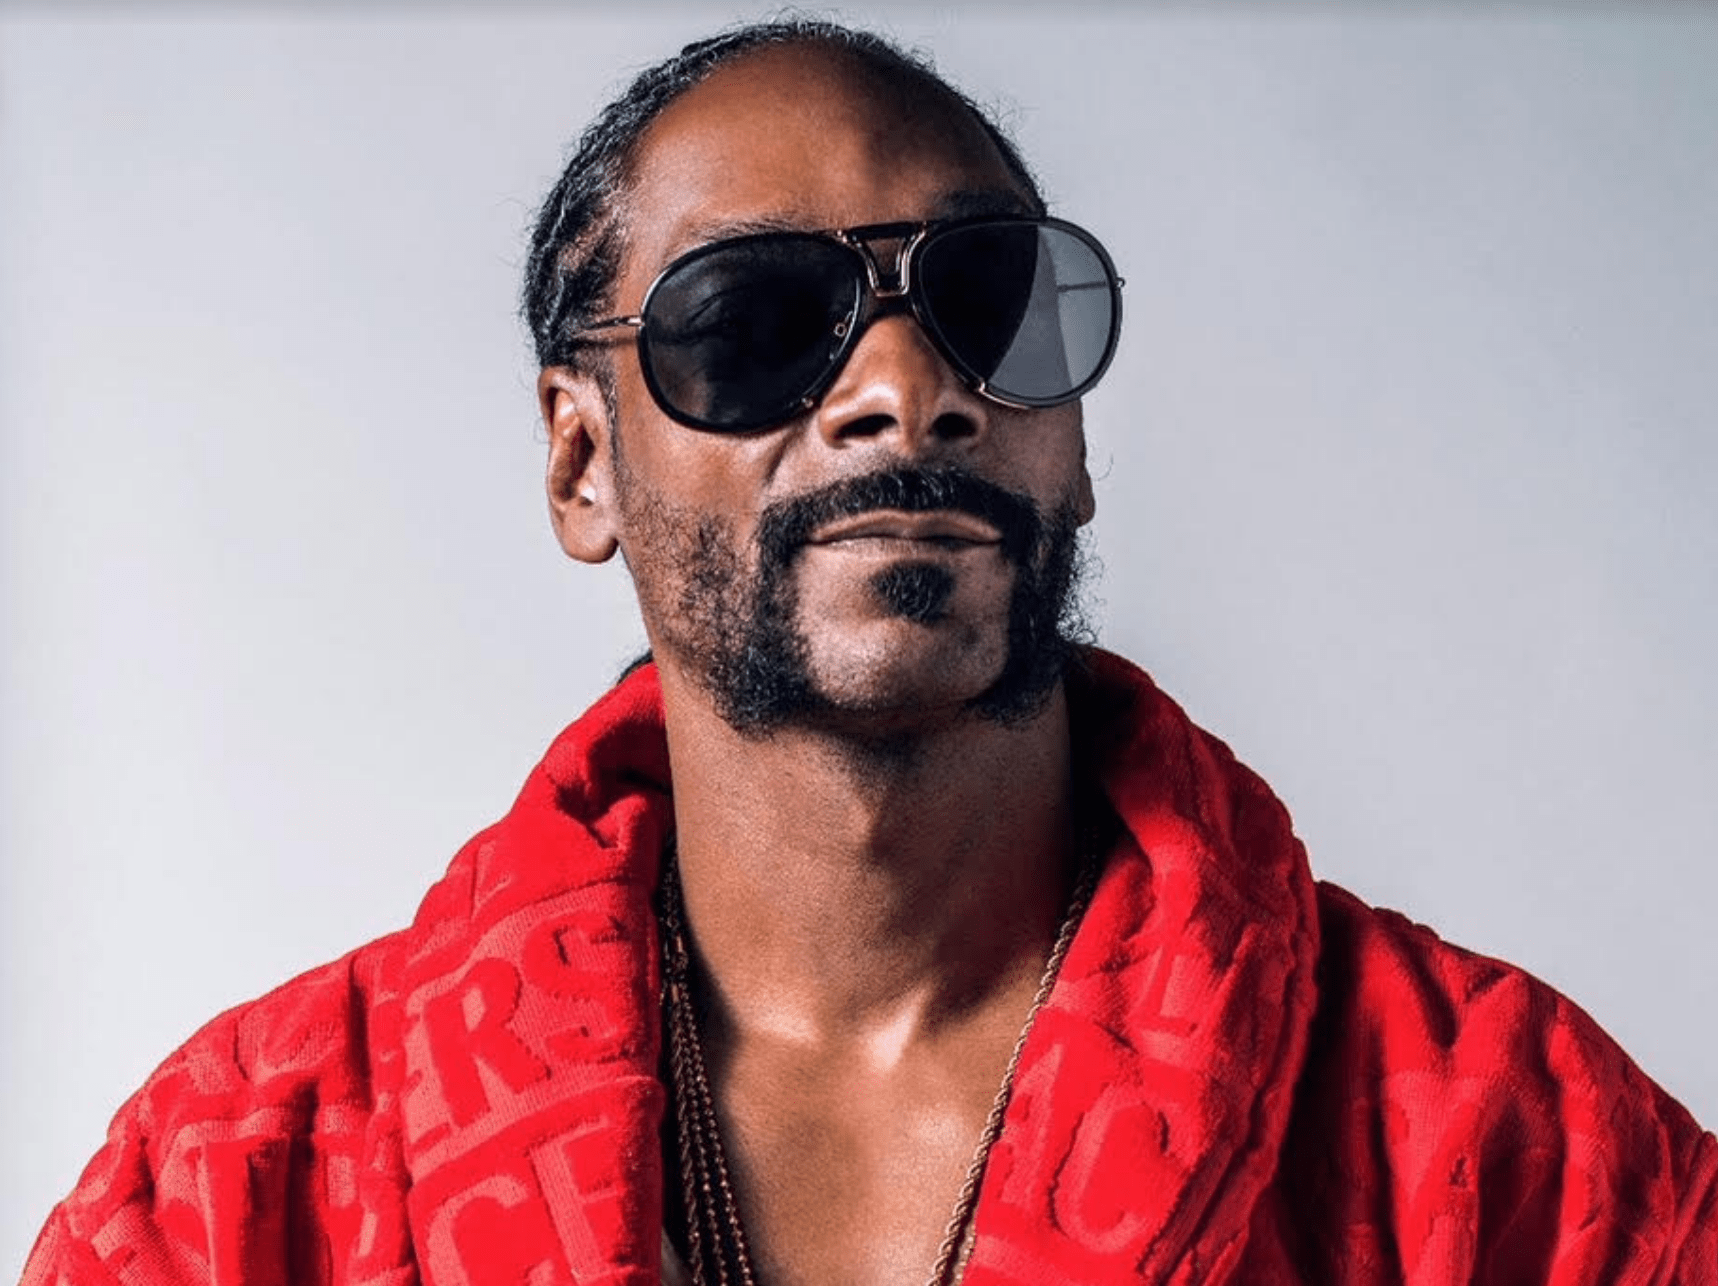 Snoop Dogg' Upcoming Lullaby Album For Kids Has Fans Excited